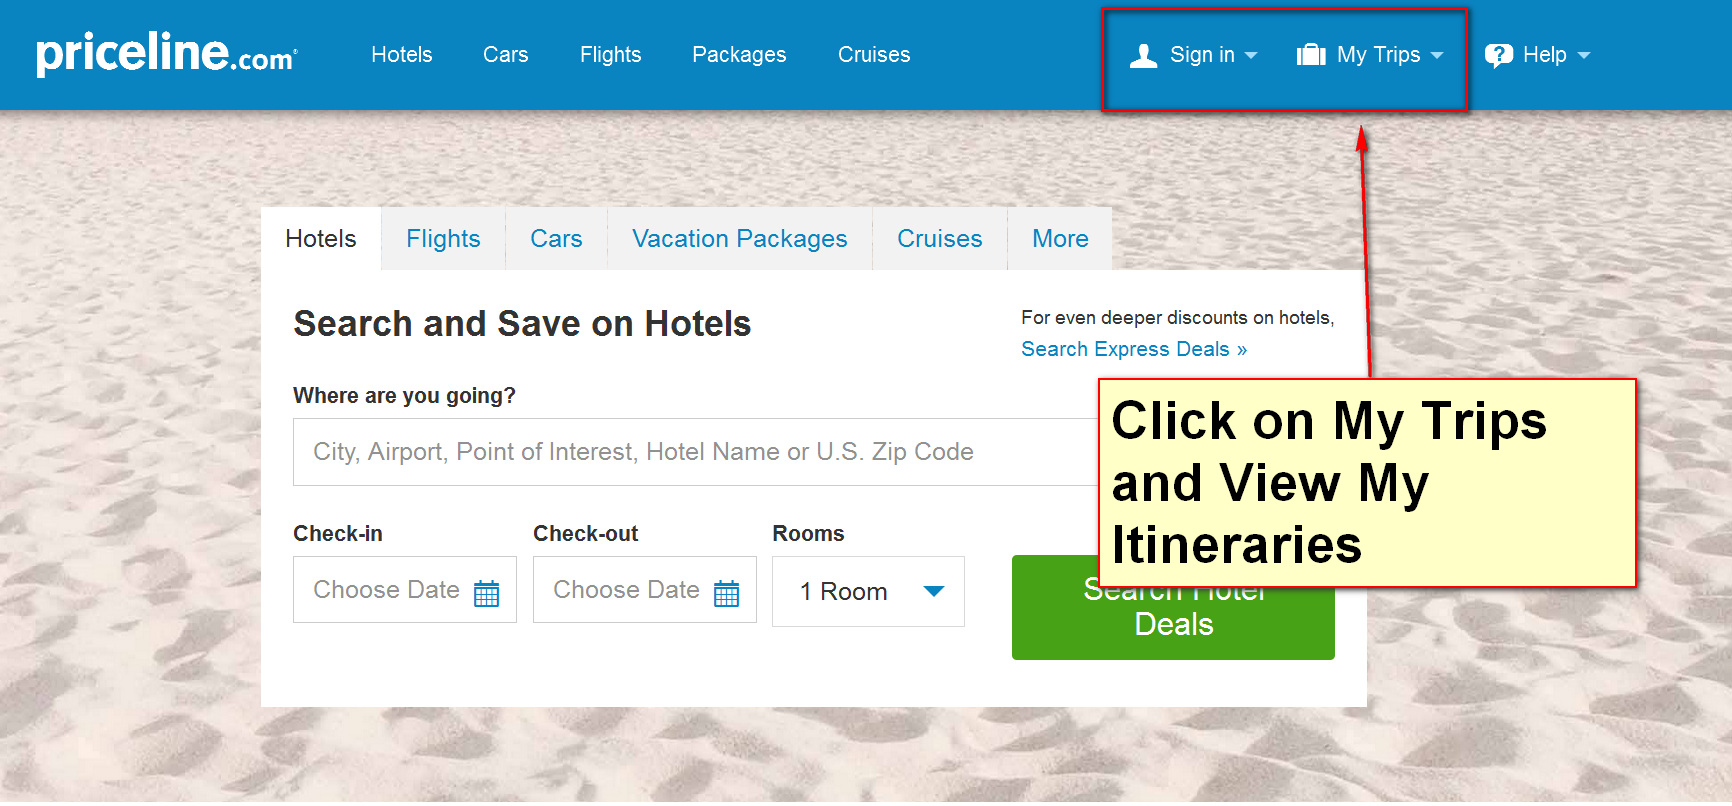 Priceline Risk Free 24 Hour Cancellation Policy The Flight Deal